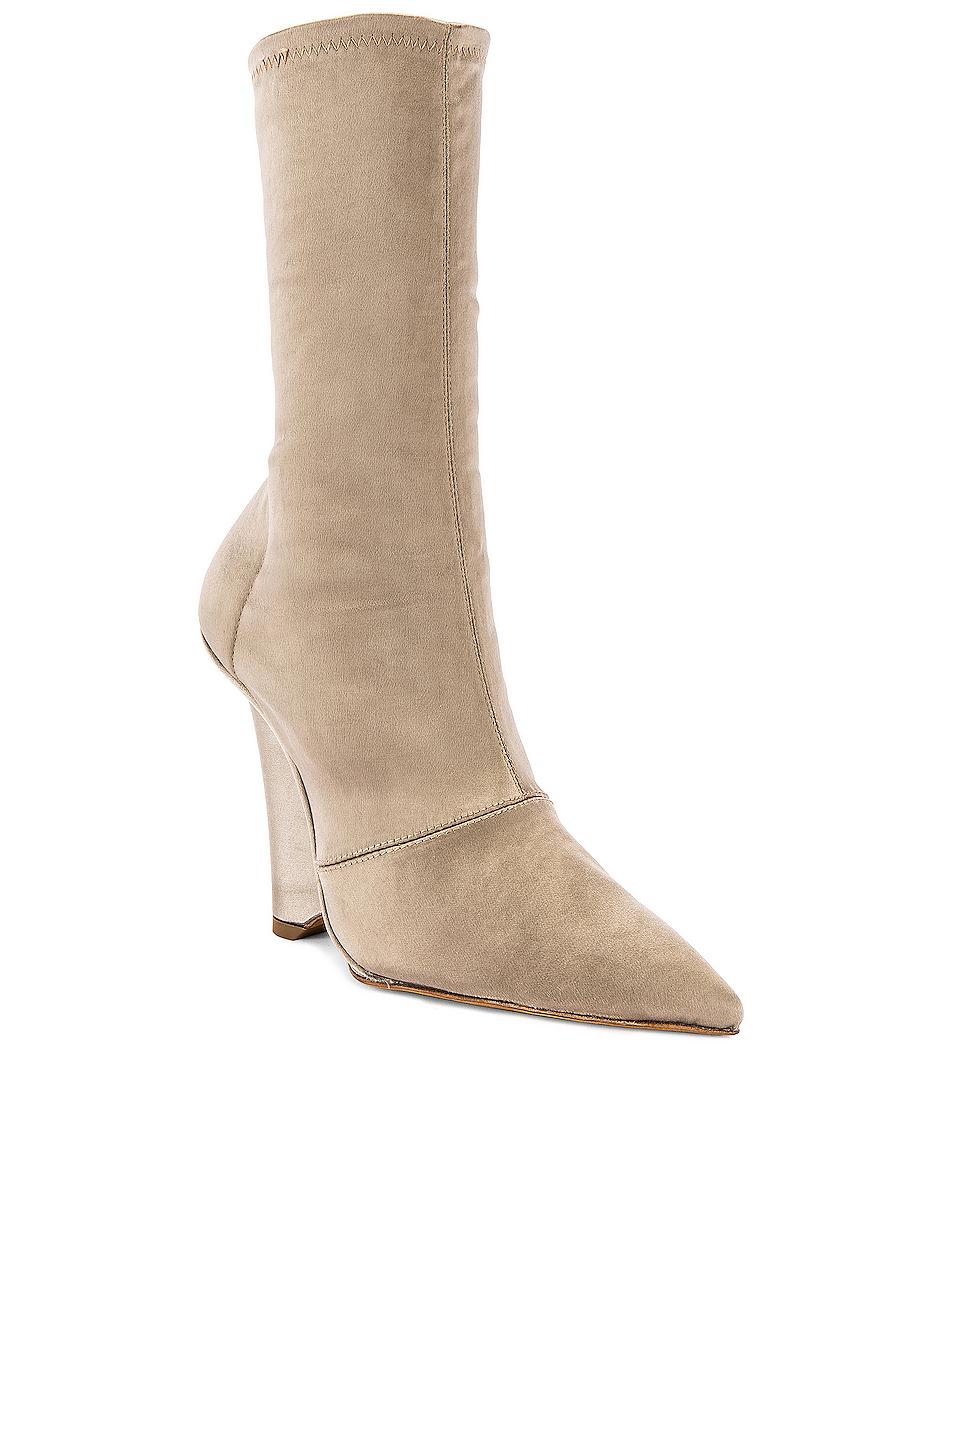 Yeezy Season 8 Stretch Satin Wedge Ankle Boot in Military Light ...